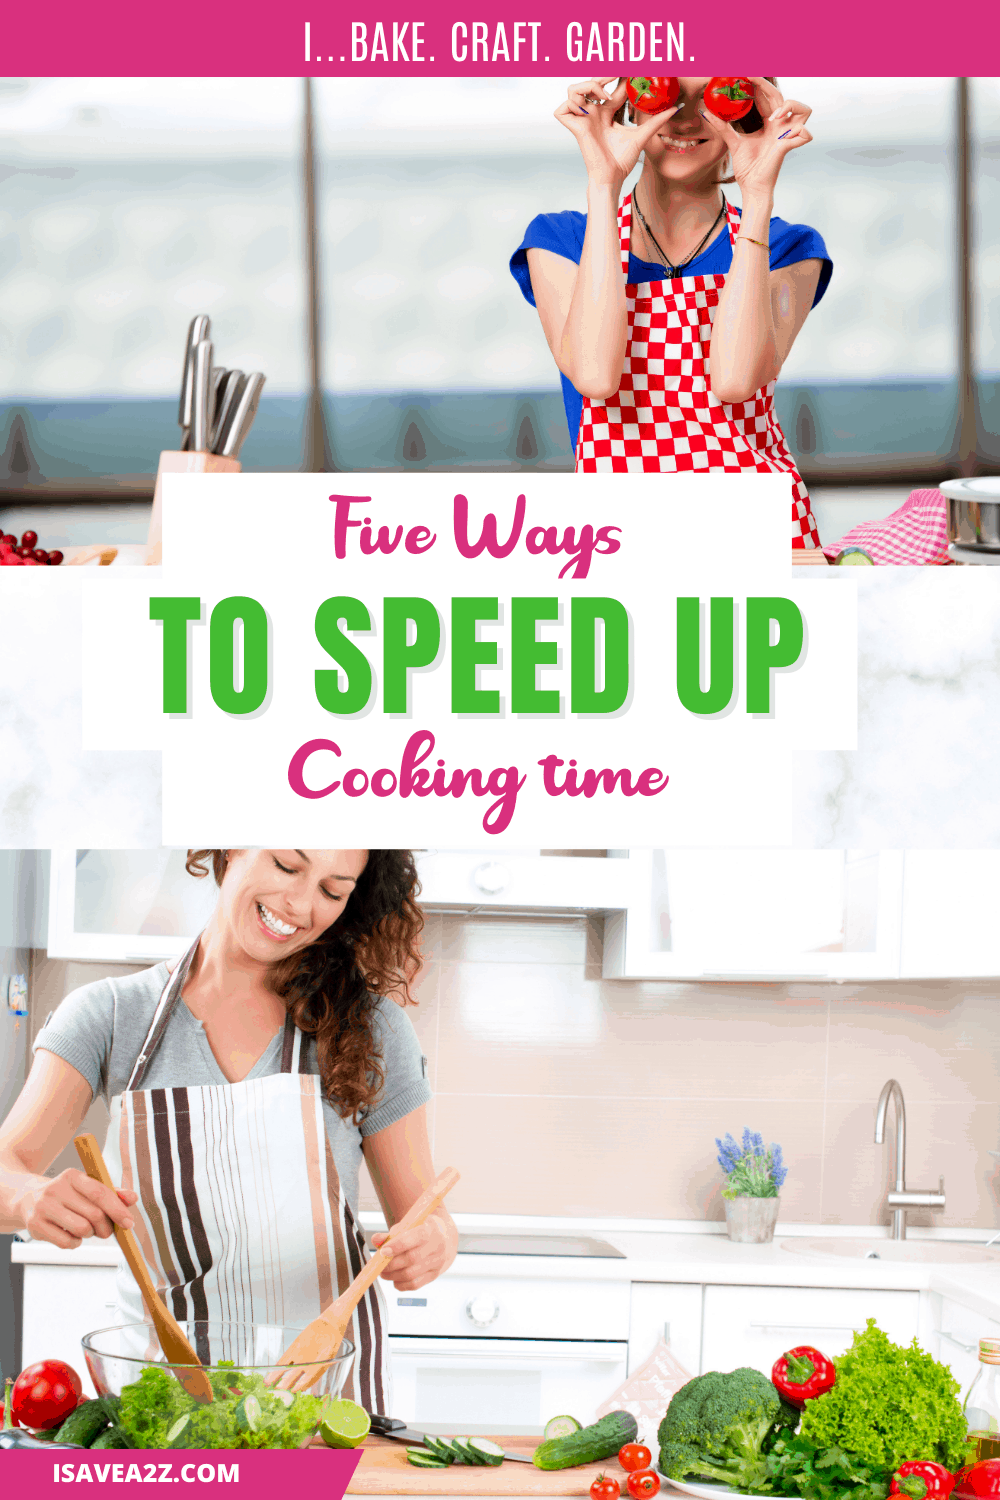 Five Ways To Speed Up Your Evening Cook Time